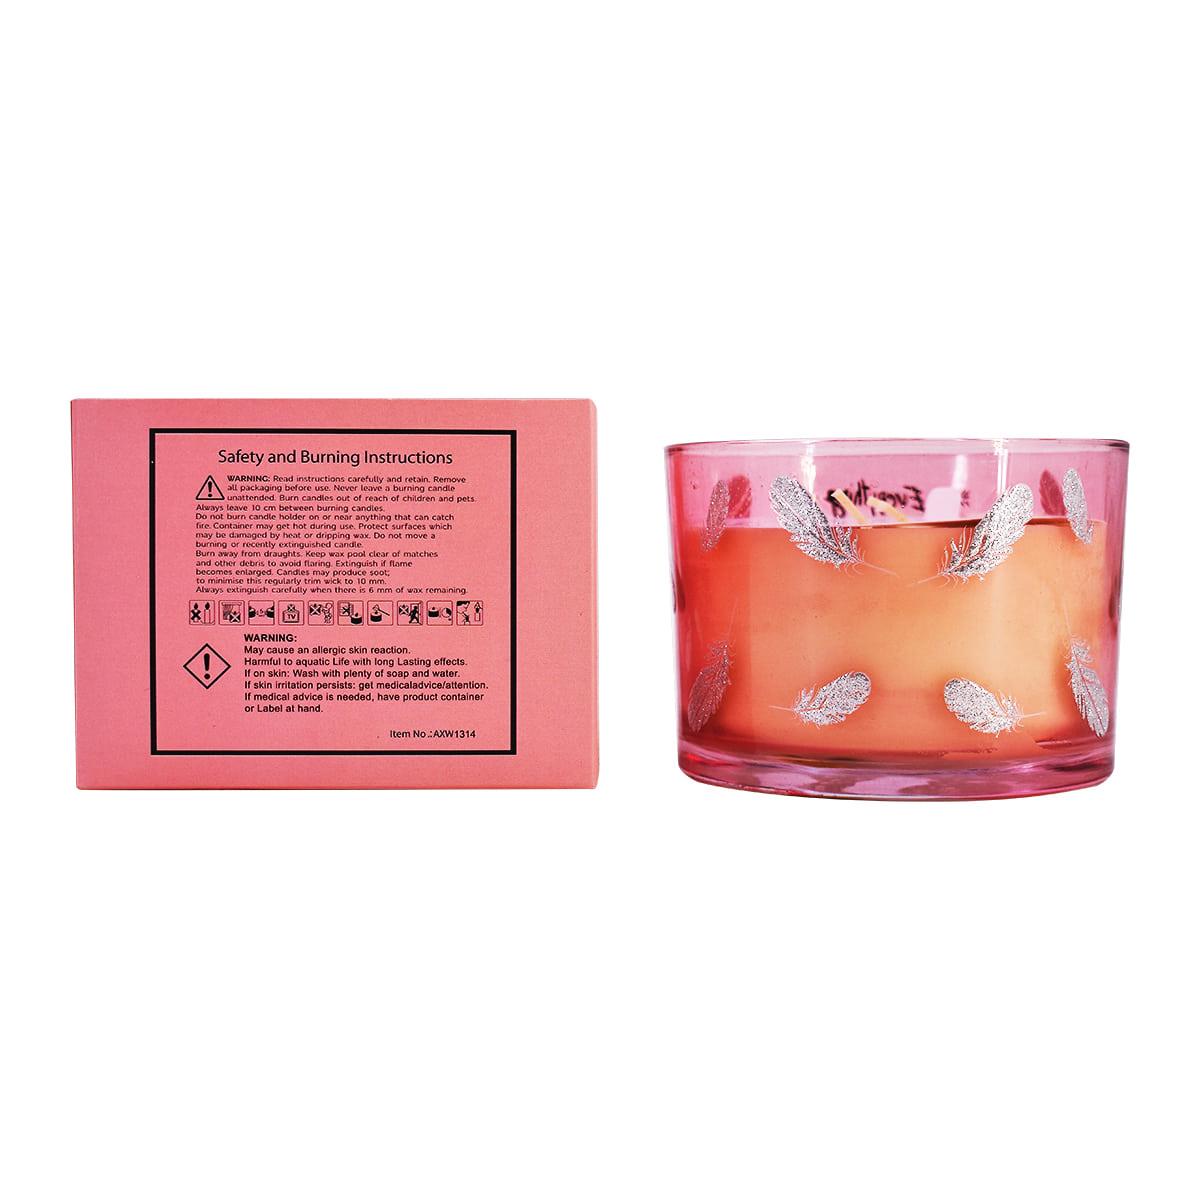 Soy Wax Scented Candle in Glass Jar (50H Burn Time) (AXW1314-C)